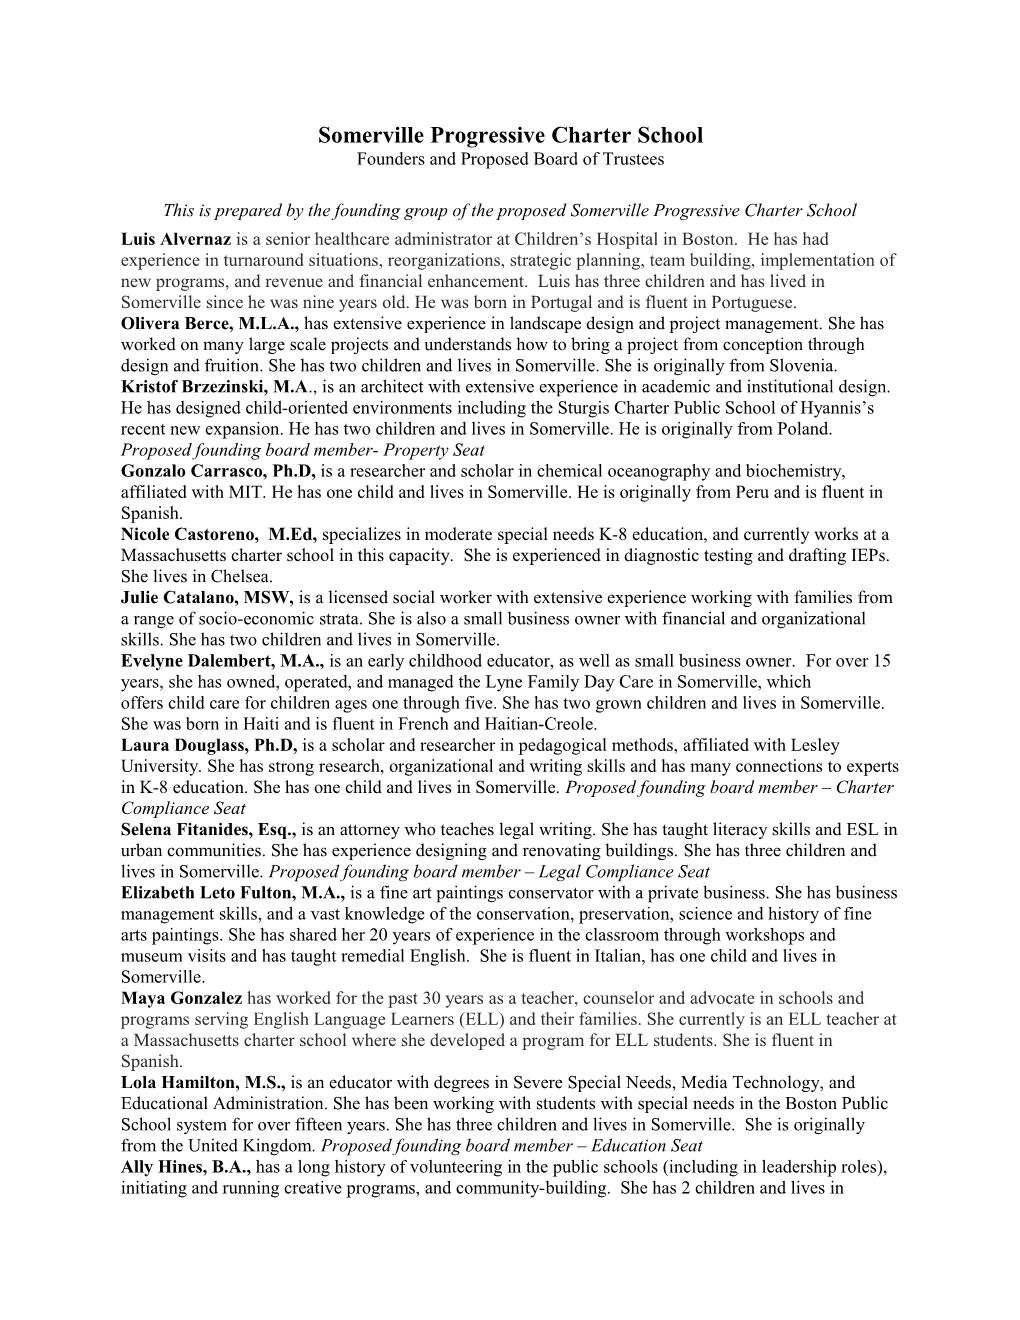 Somerville Progressive Charter School, Founders and Proposed Board of Trustees, February 2012